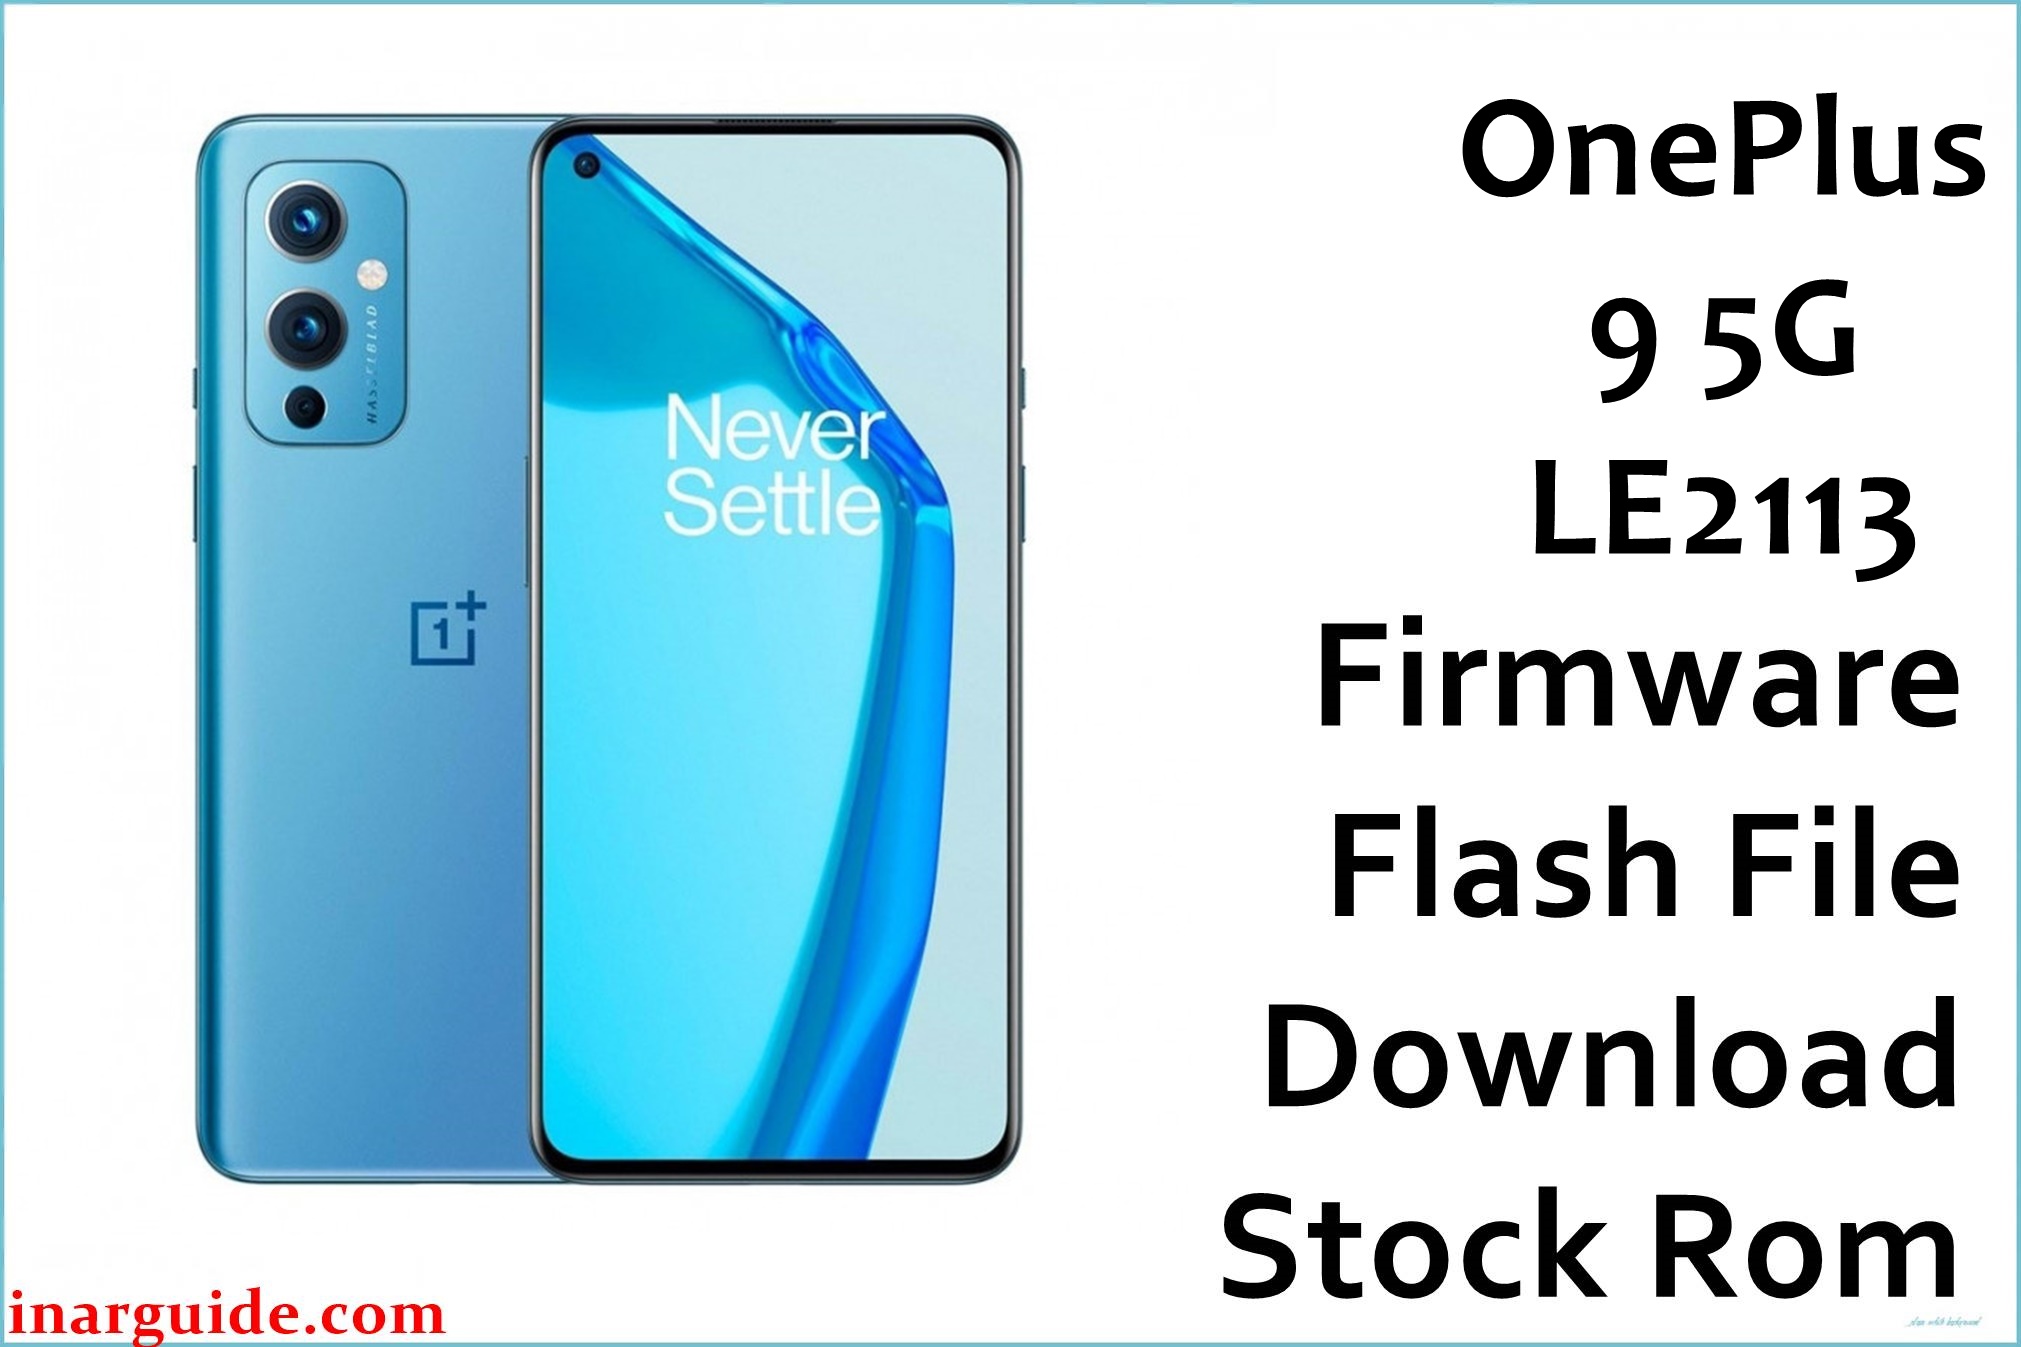 OnePlus 9 5G LE2113